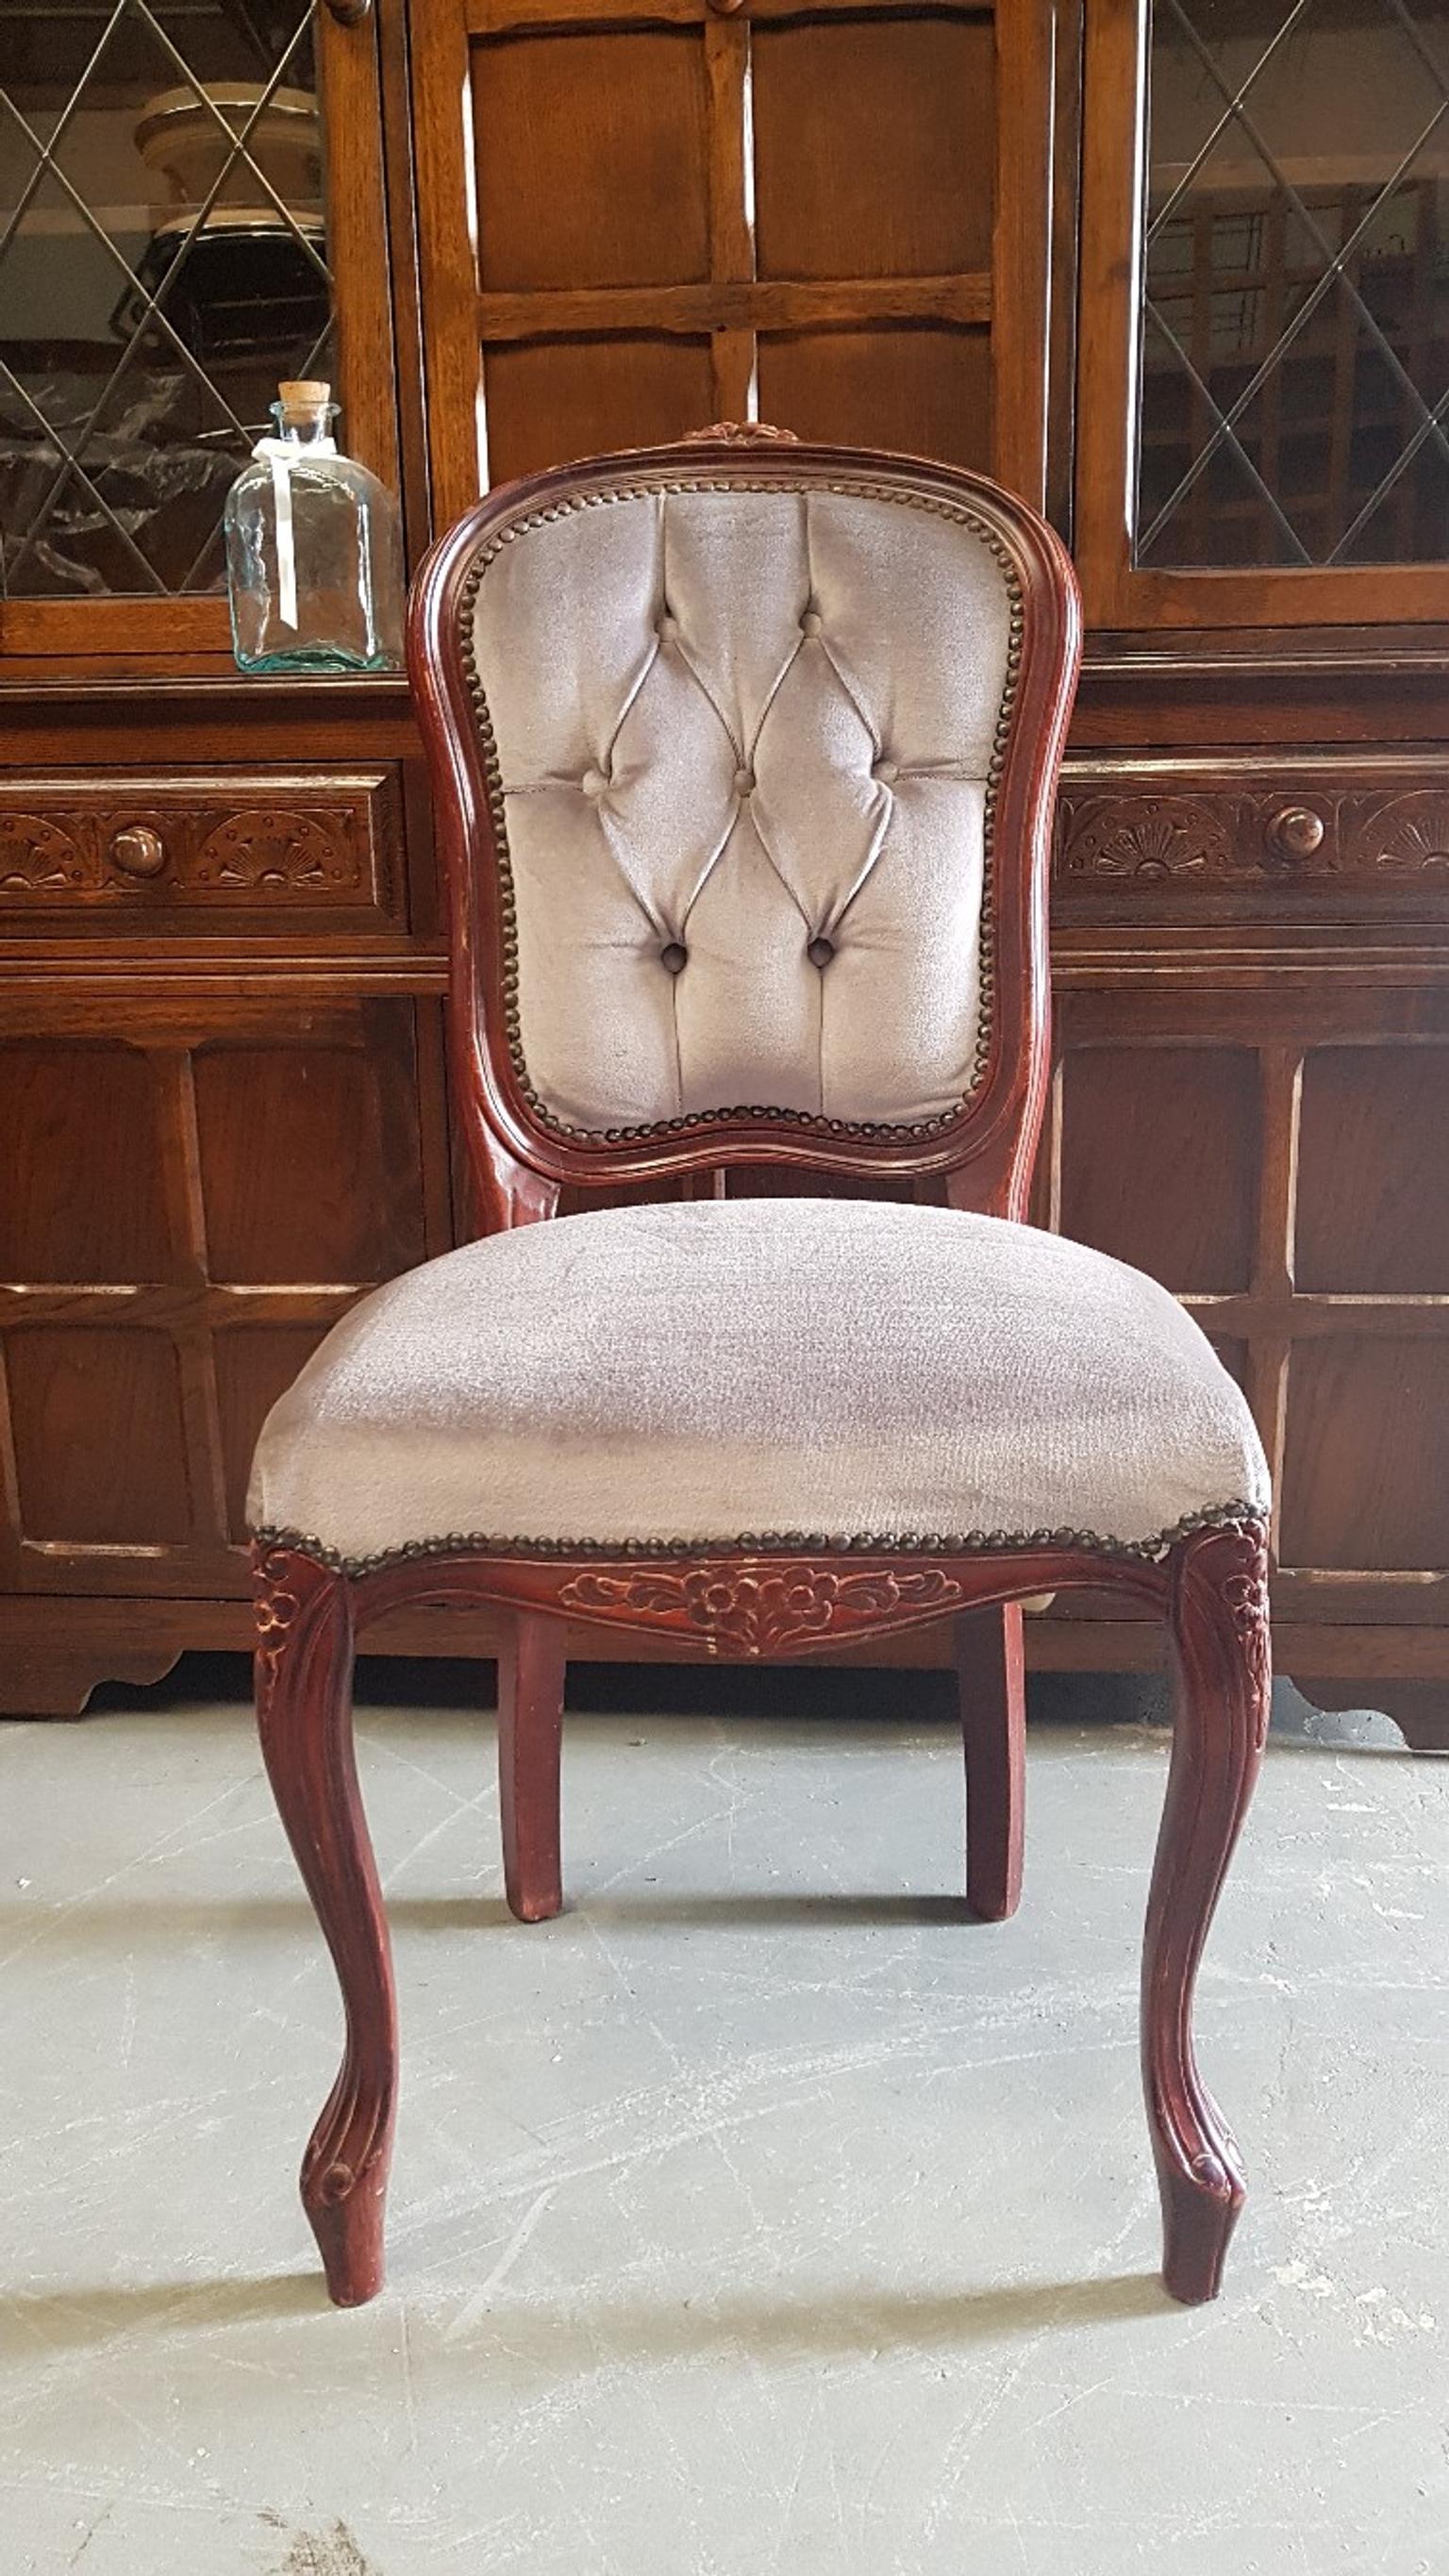 2 French Style Carved Chairs Grey Fabric In B77 Tamworth Fur 25